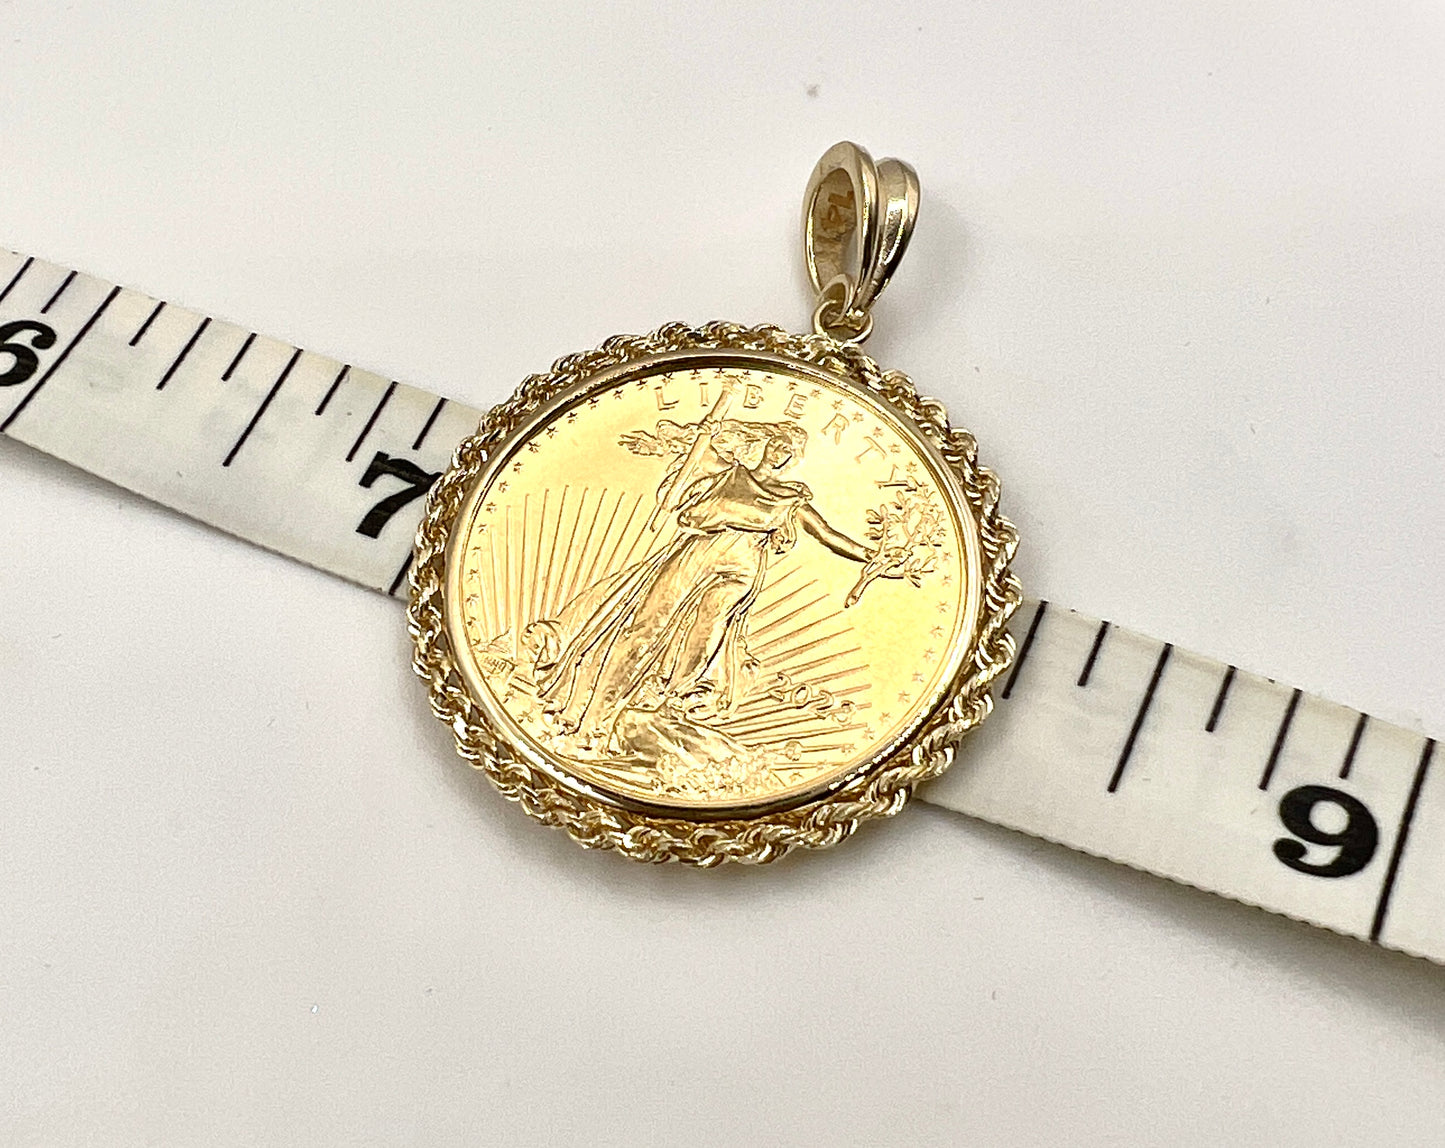 Wideband Distinguished Coin Jewelry 14k Polished Rope Mounted 1/2oz American Eagle Prong Coin Bezel Pendant